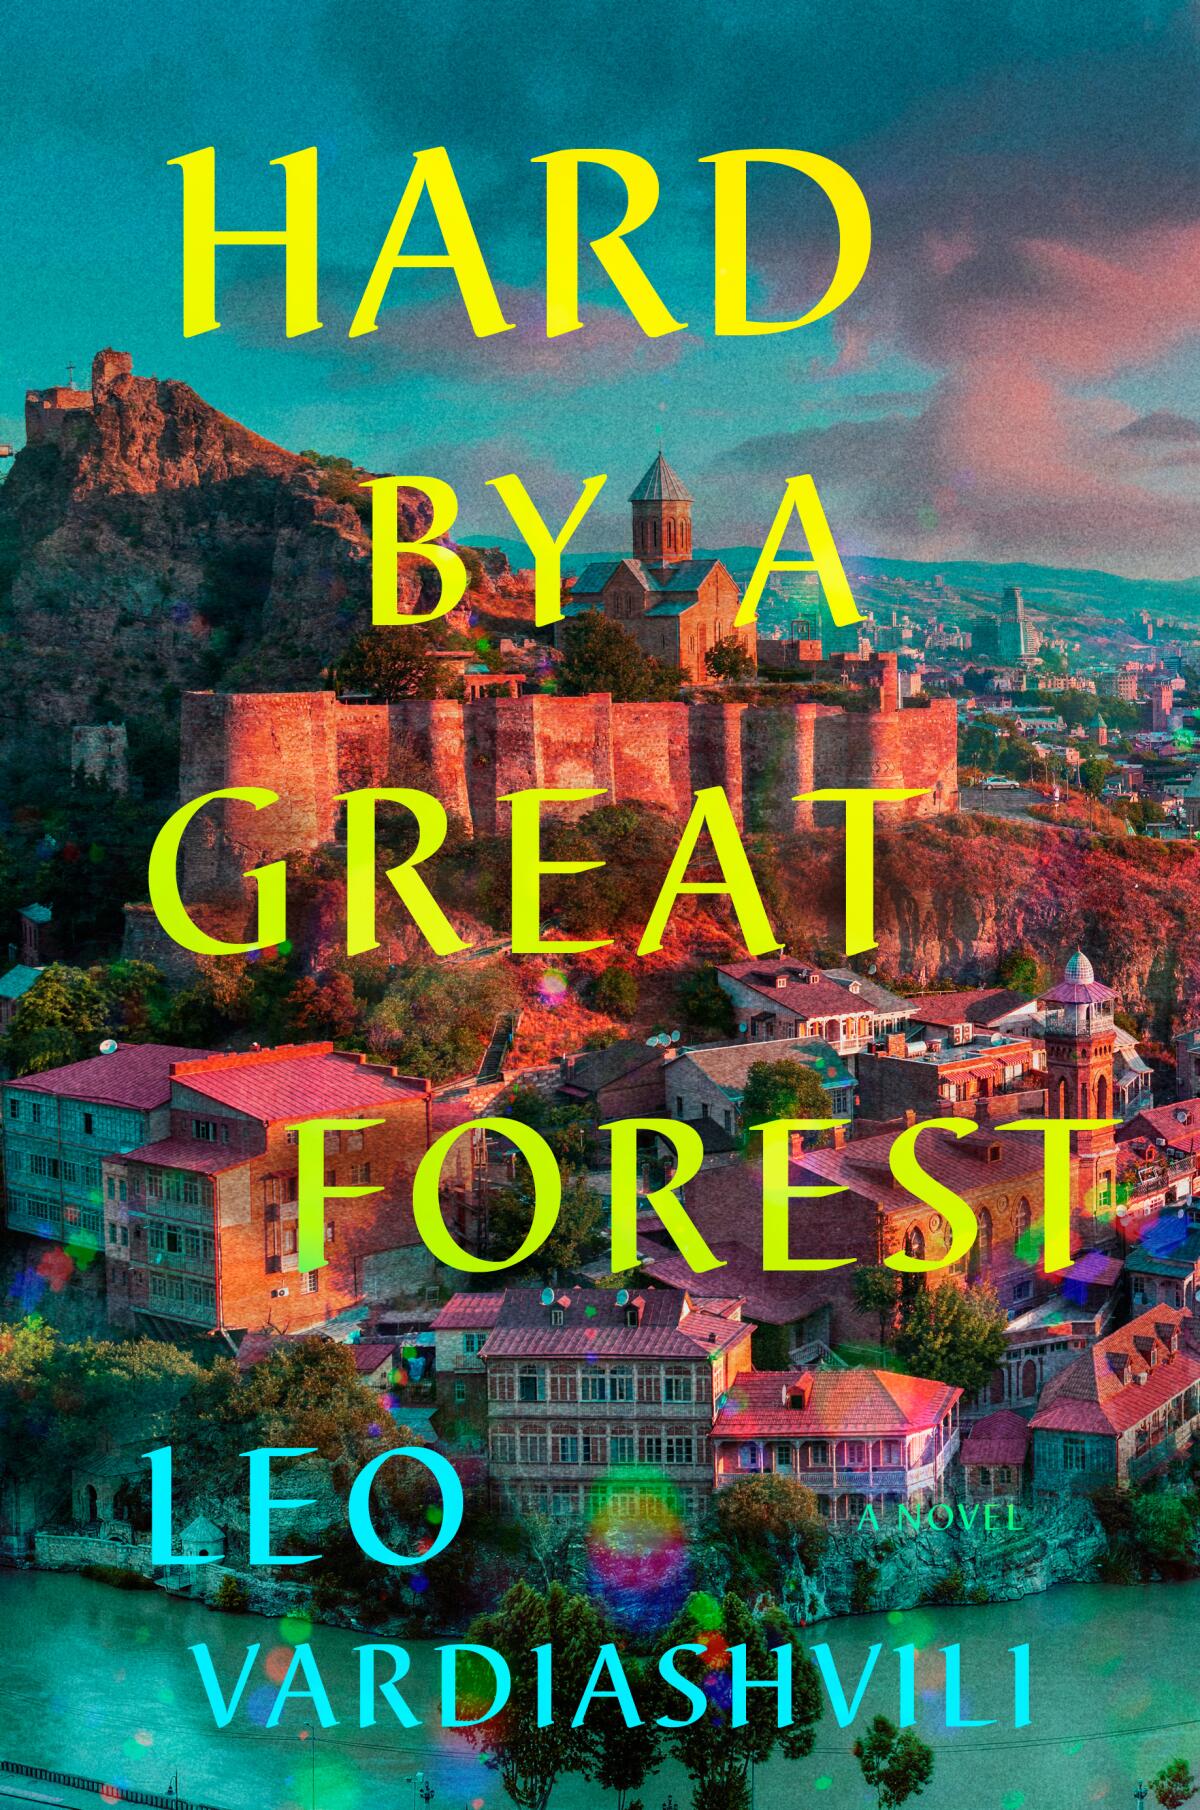 The cover of the book "Hard by a Great Forest" by Leo Vardiashvili